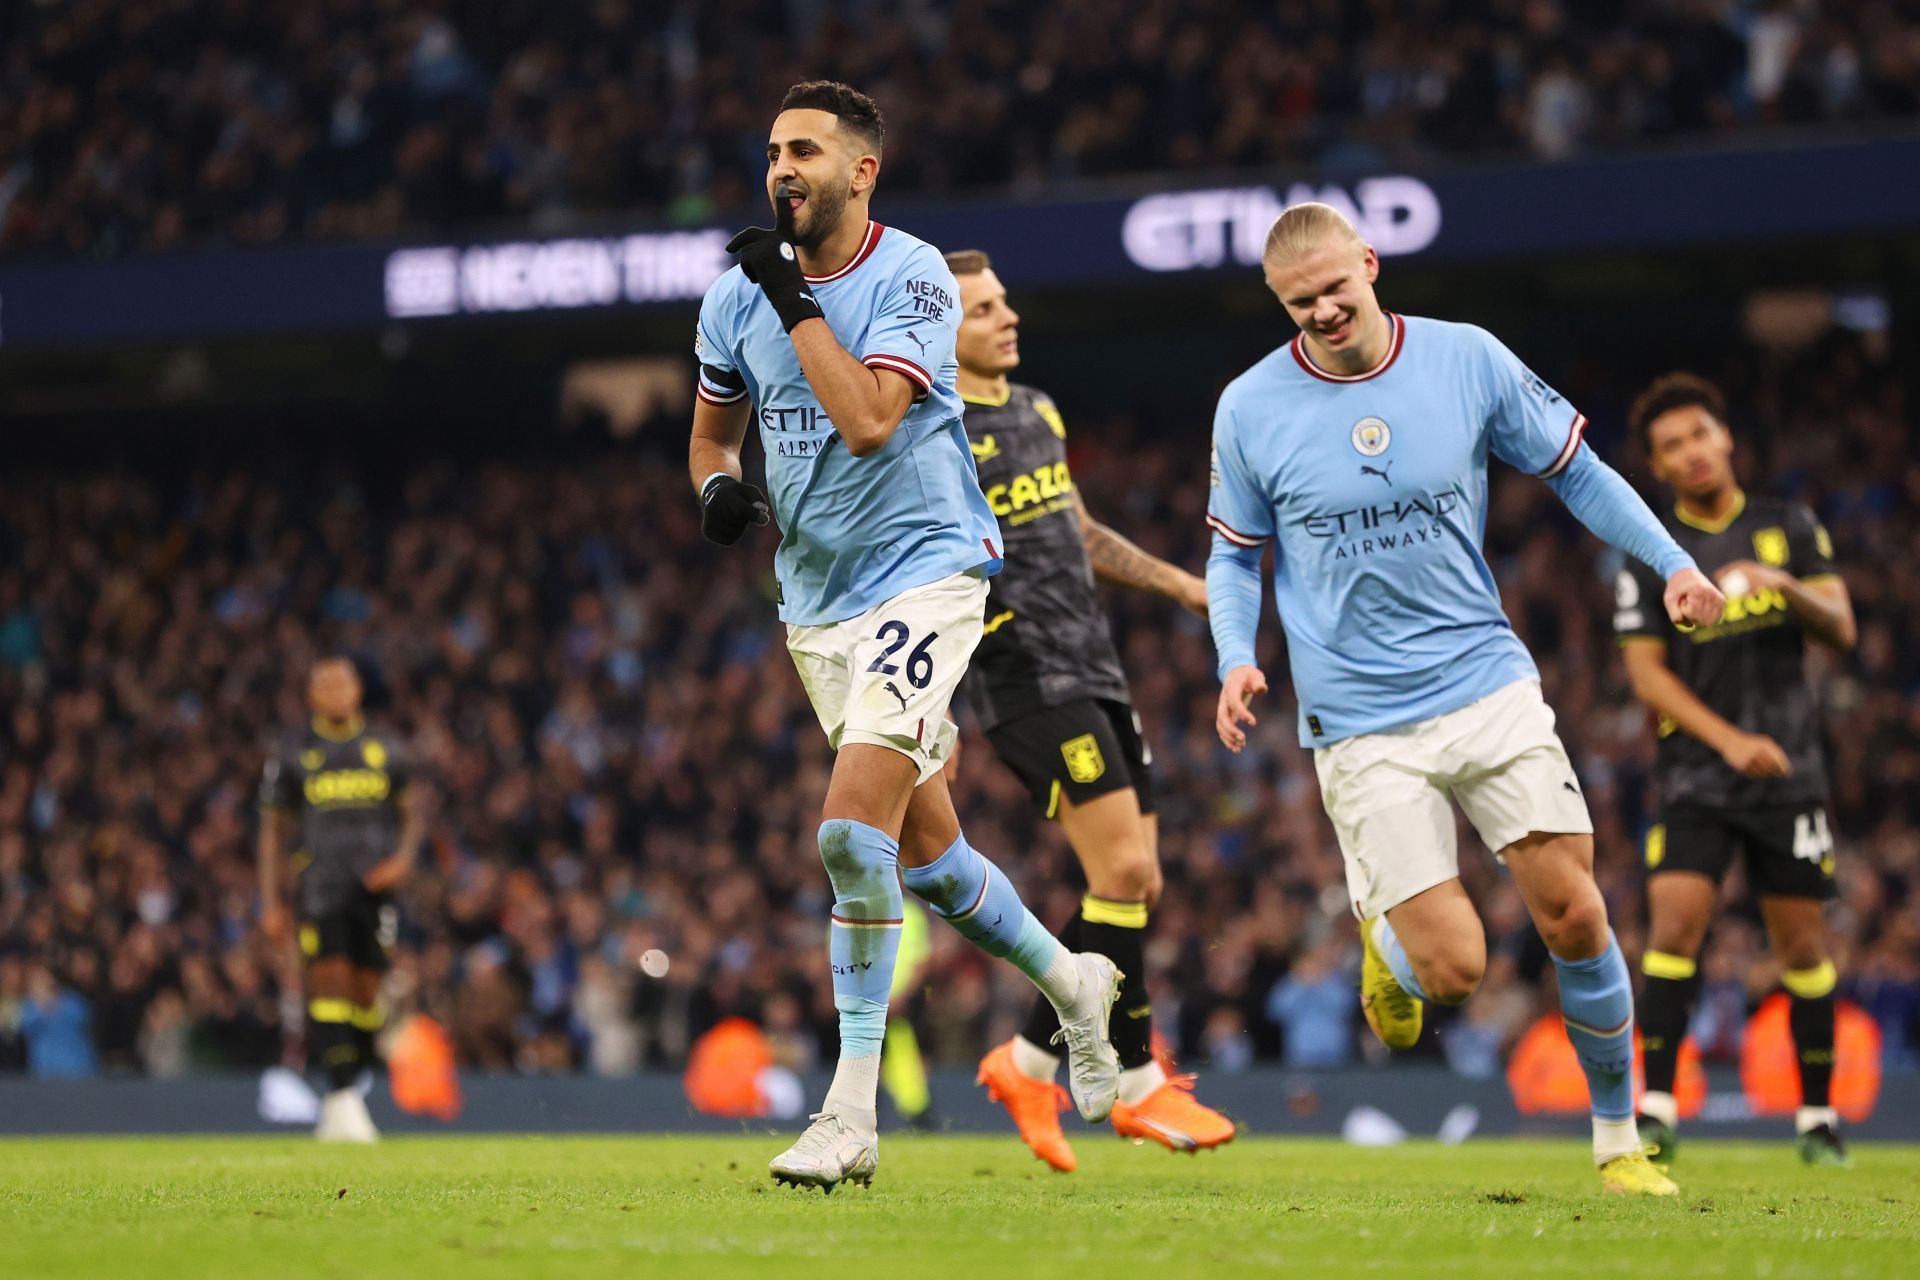 Mahrez (left) was extremely dangerous on the right flank for City.